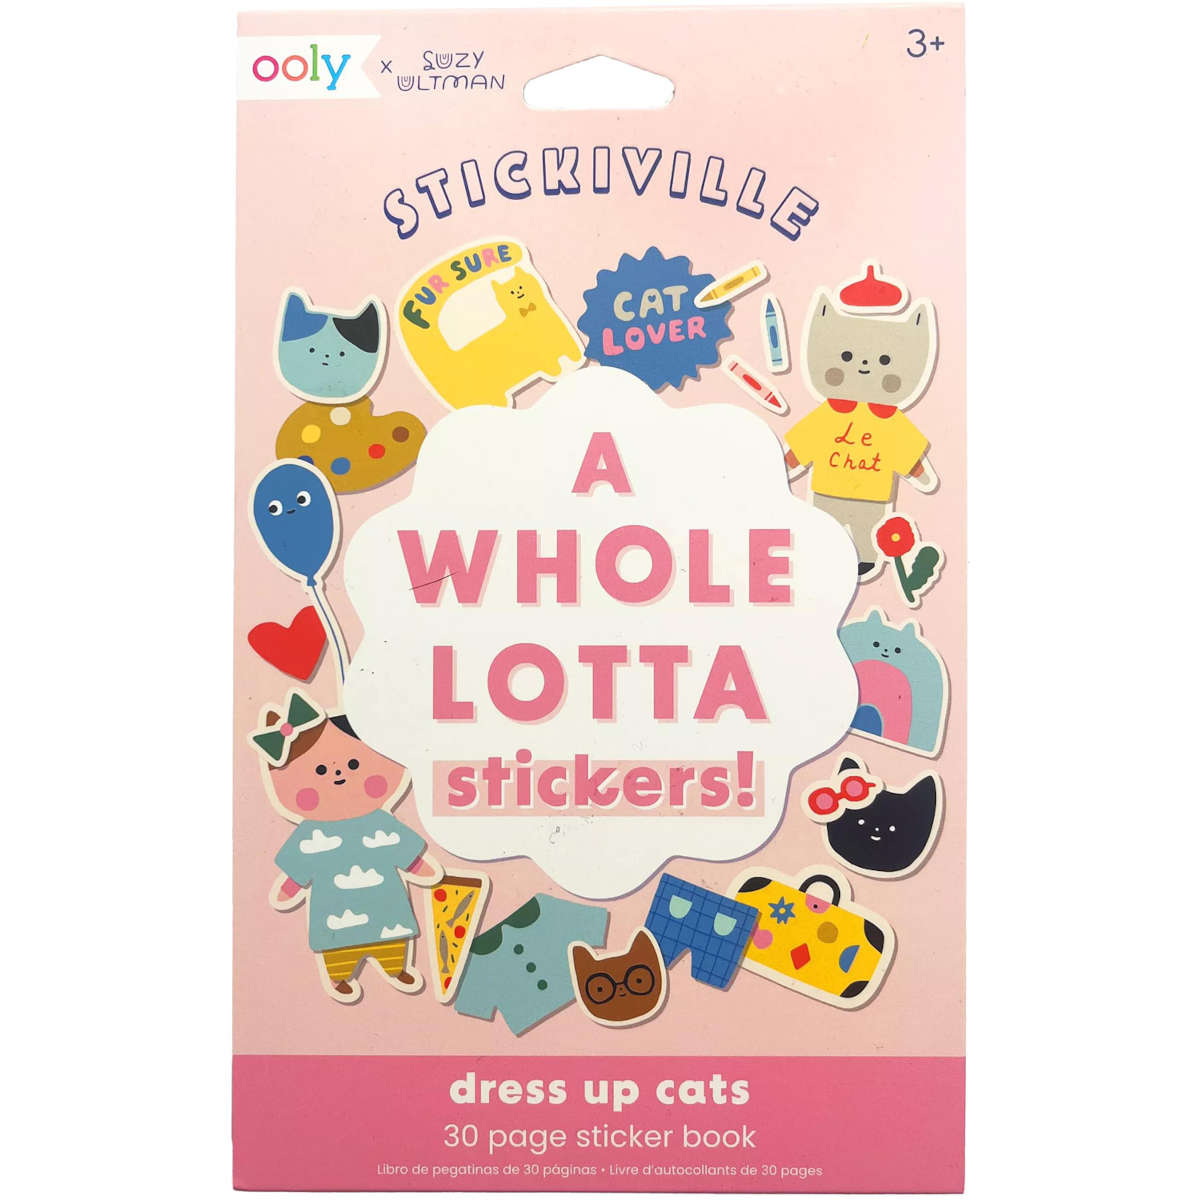 Ooly Stickiville A Whole Lotta Stickers! Dress Up Cats